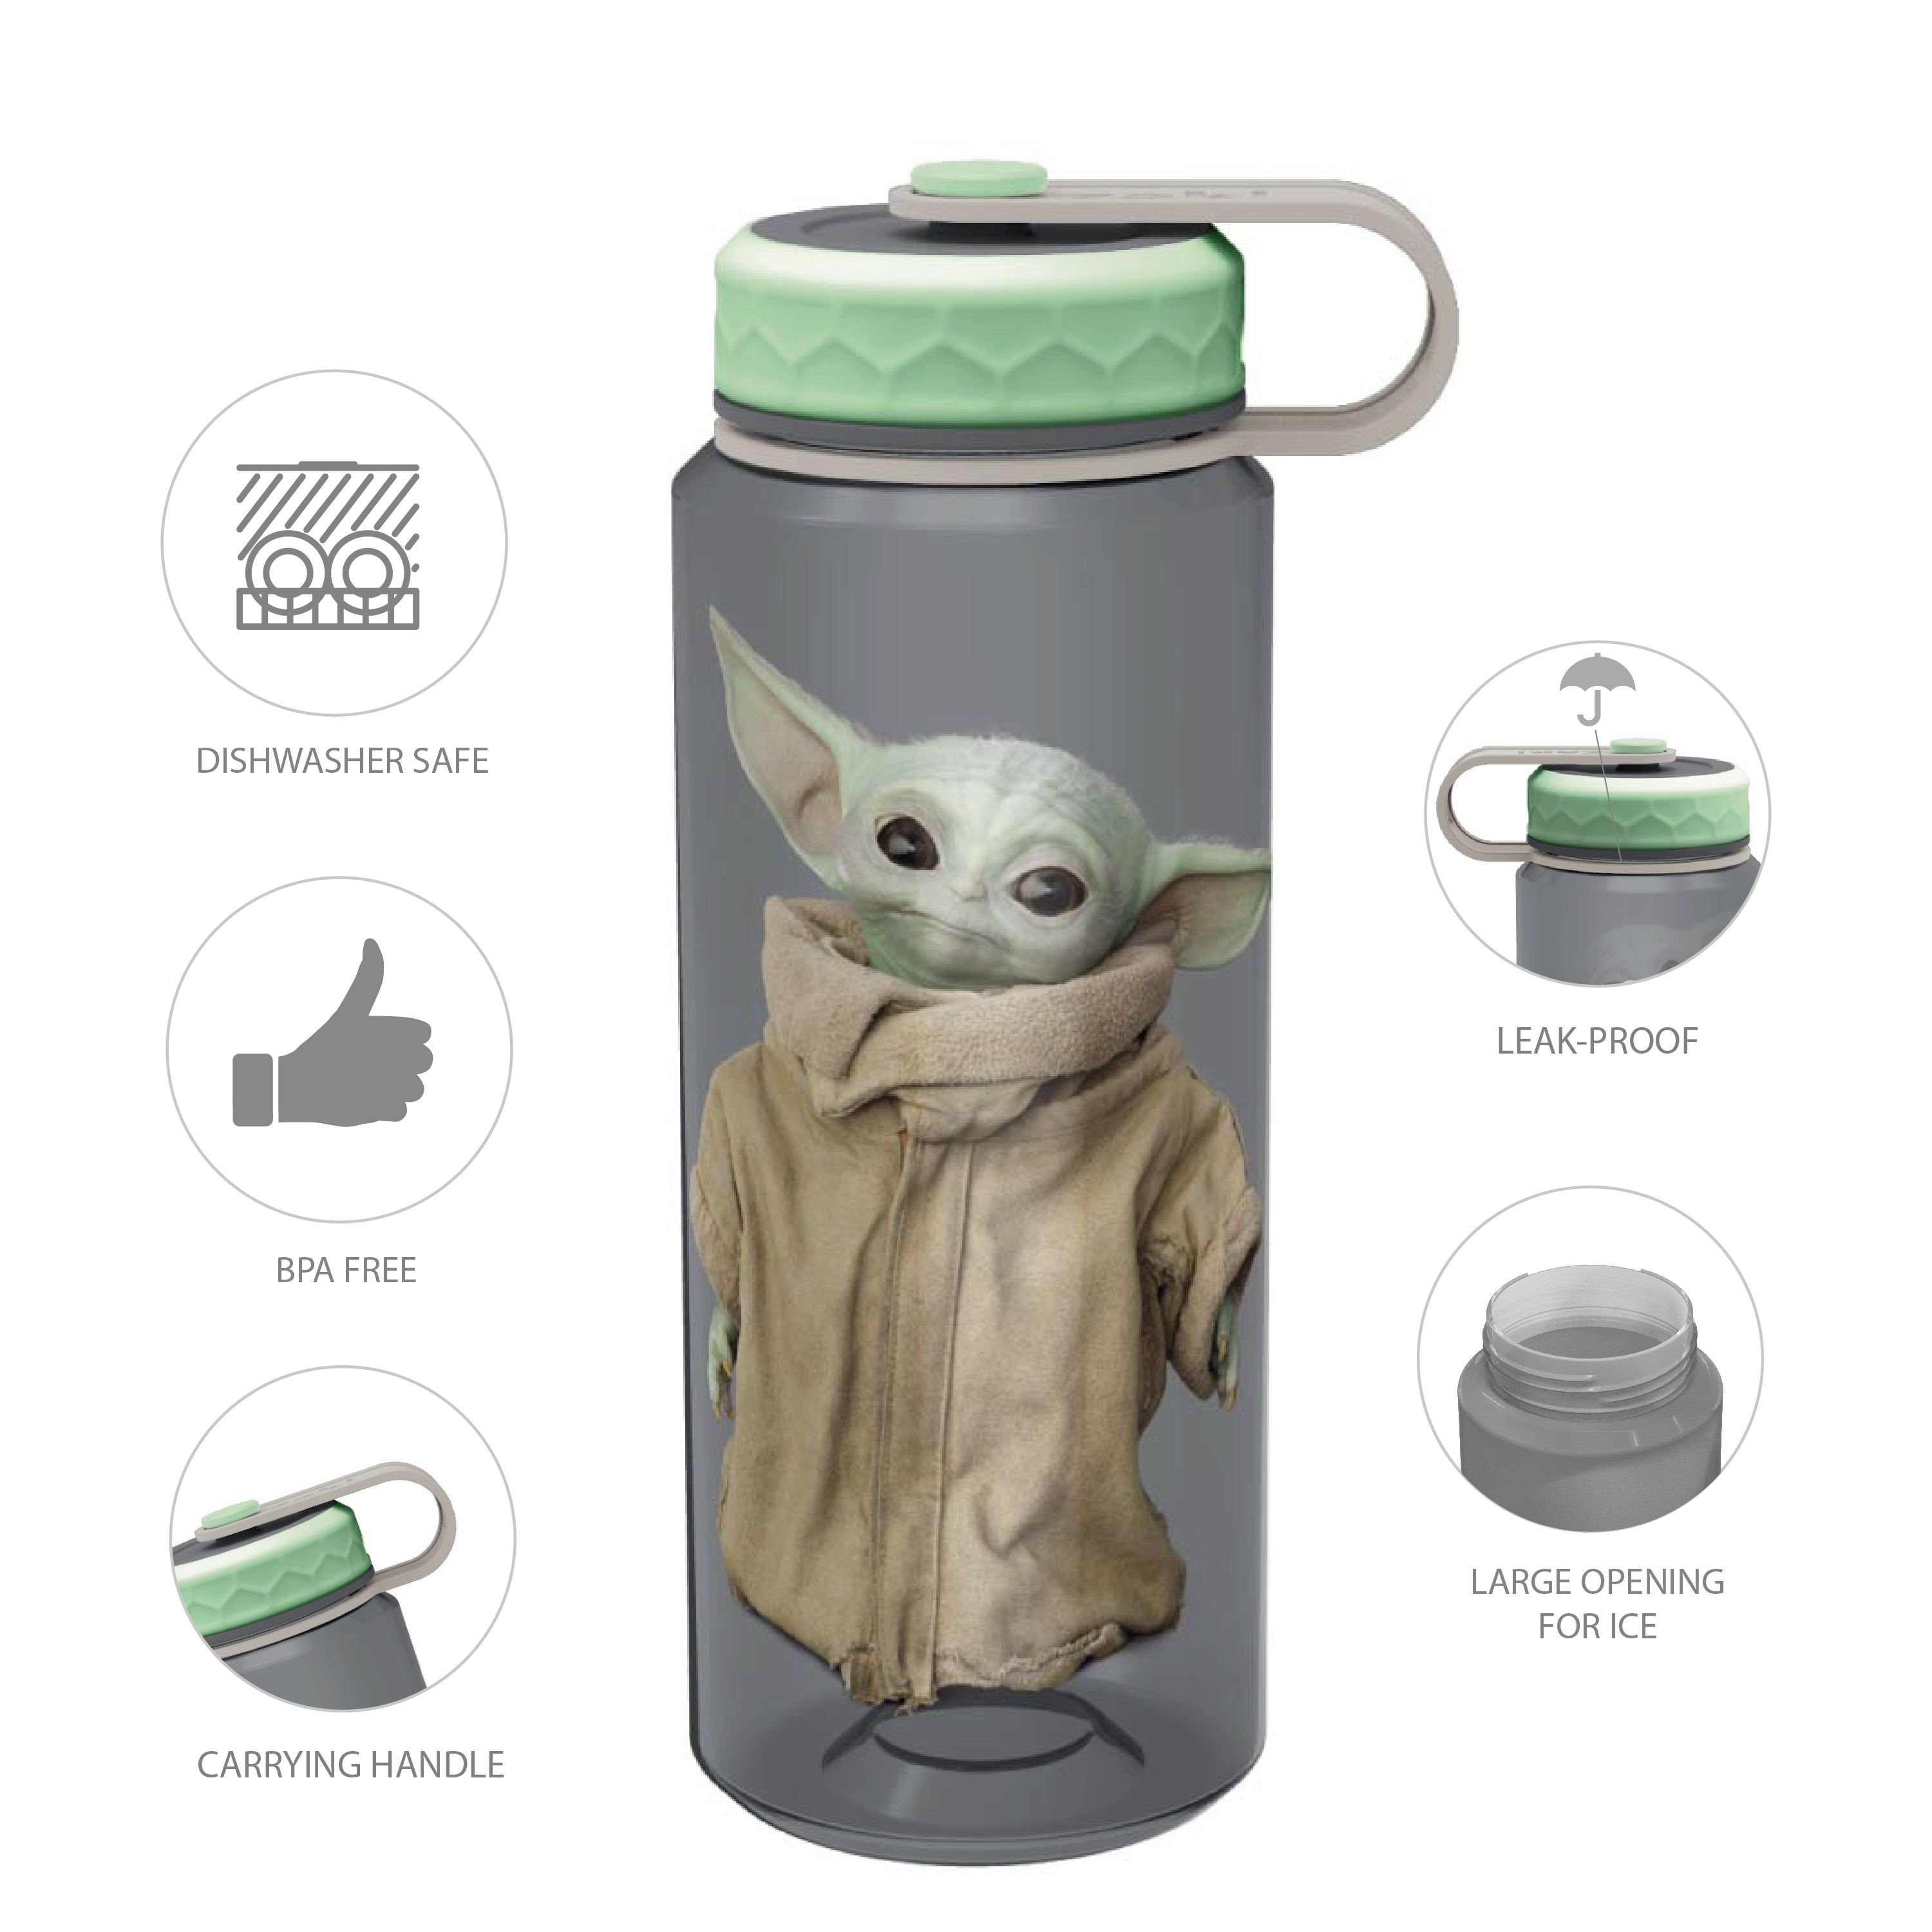 Star Wars: The Mandalorian 36 ounce Reusable Plastic Water Bottle, The Child (Baby Yoda) slideshow image 7